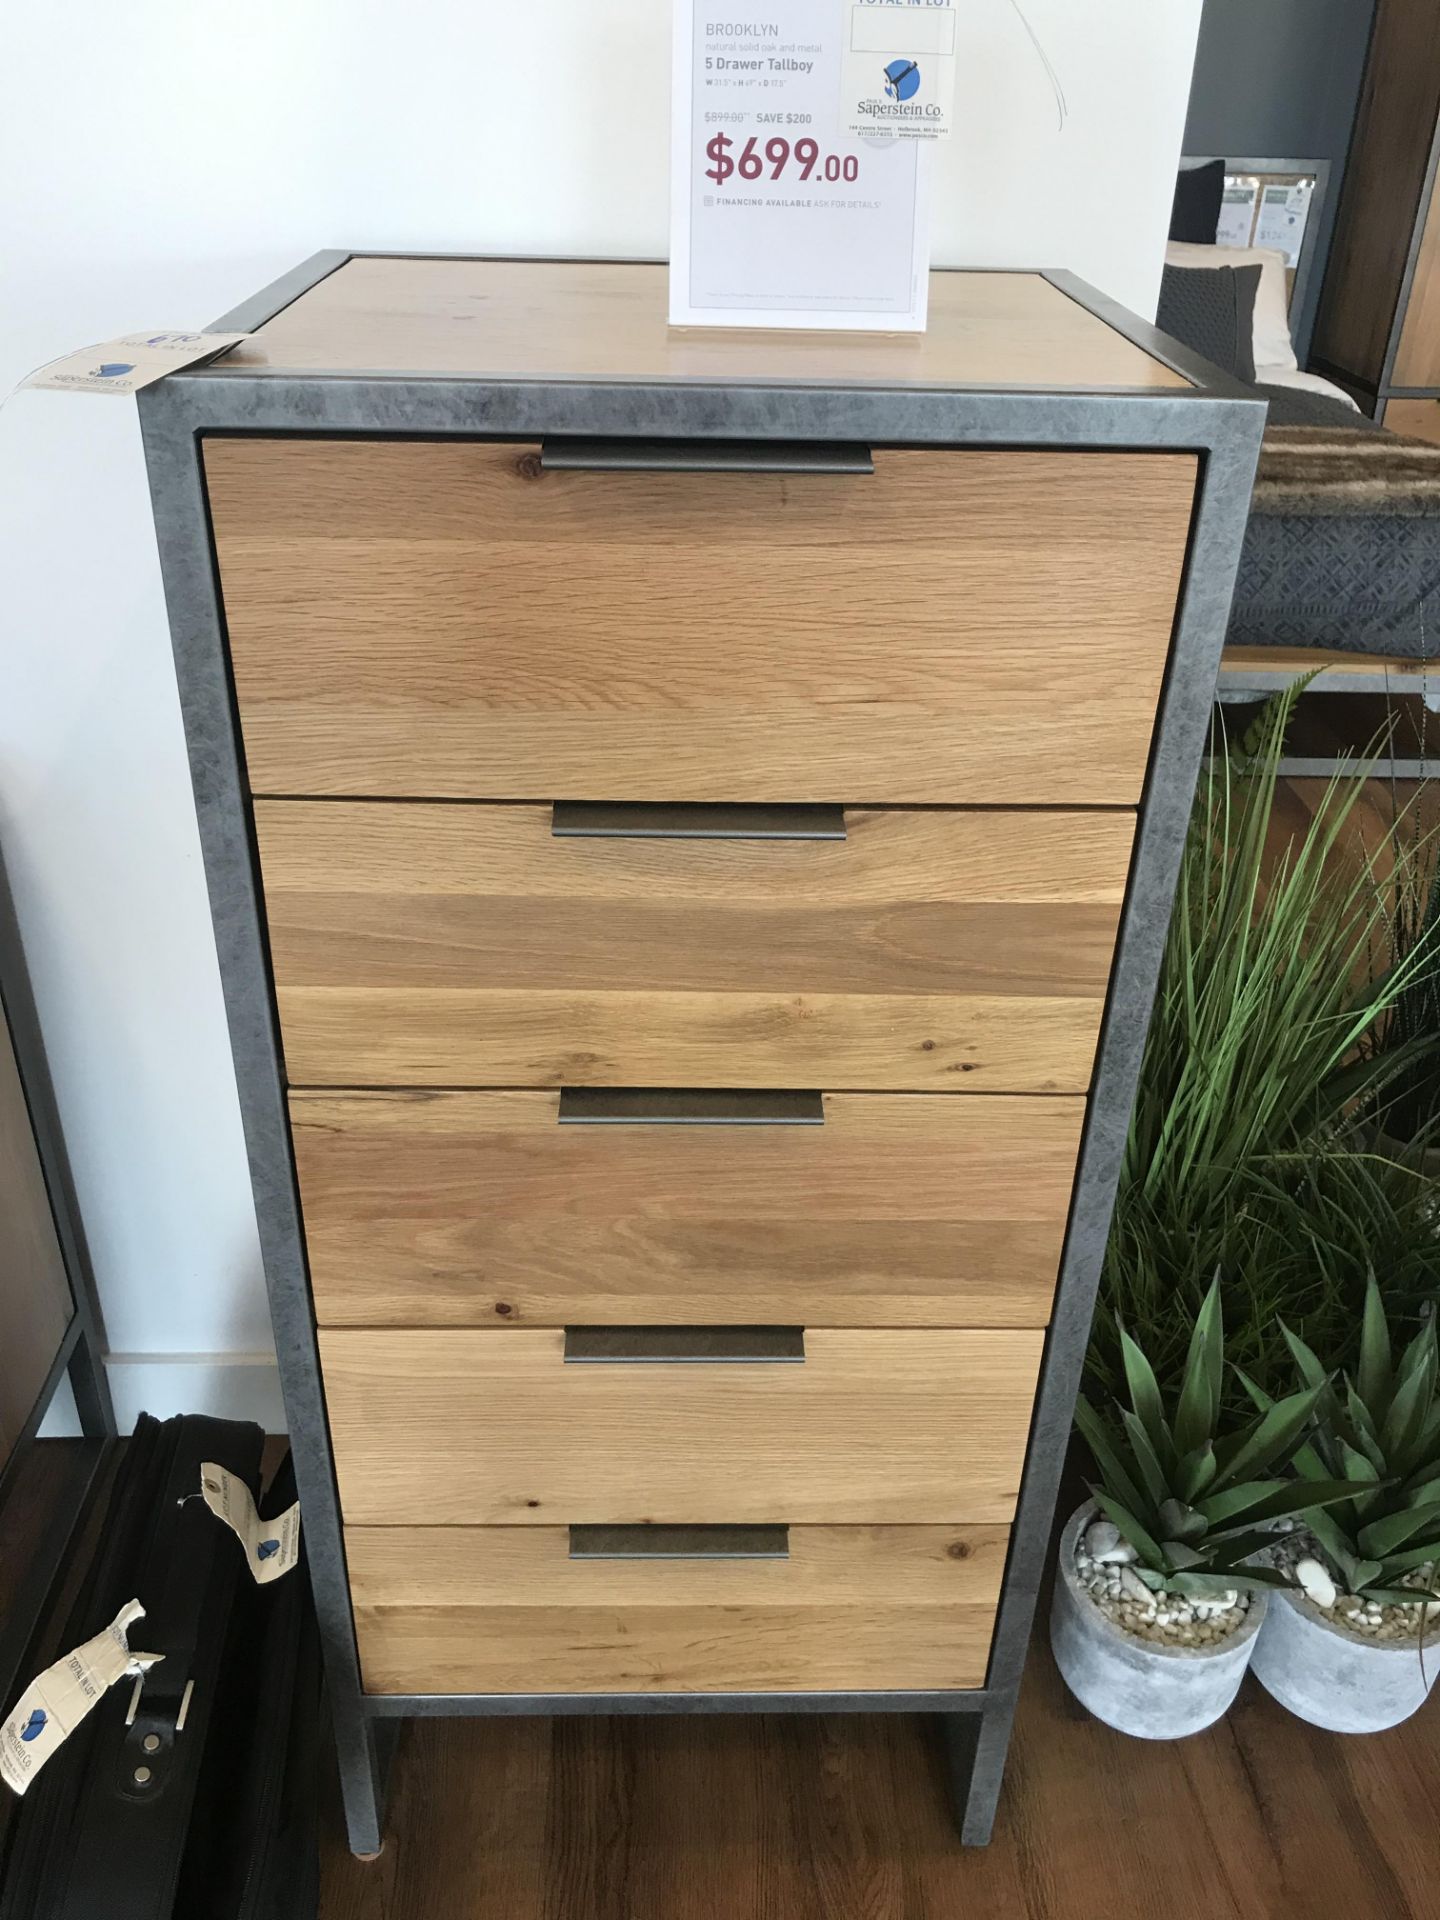 5 Drawer Tallboy (Brooklyn) See Picture For Dimensions and Product Info